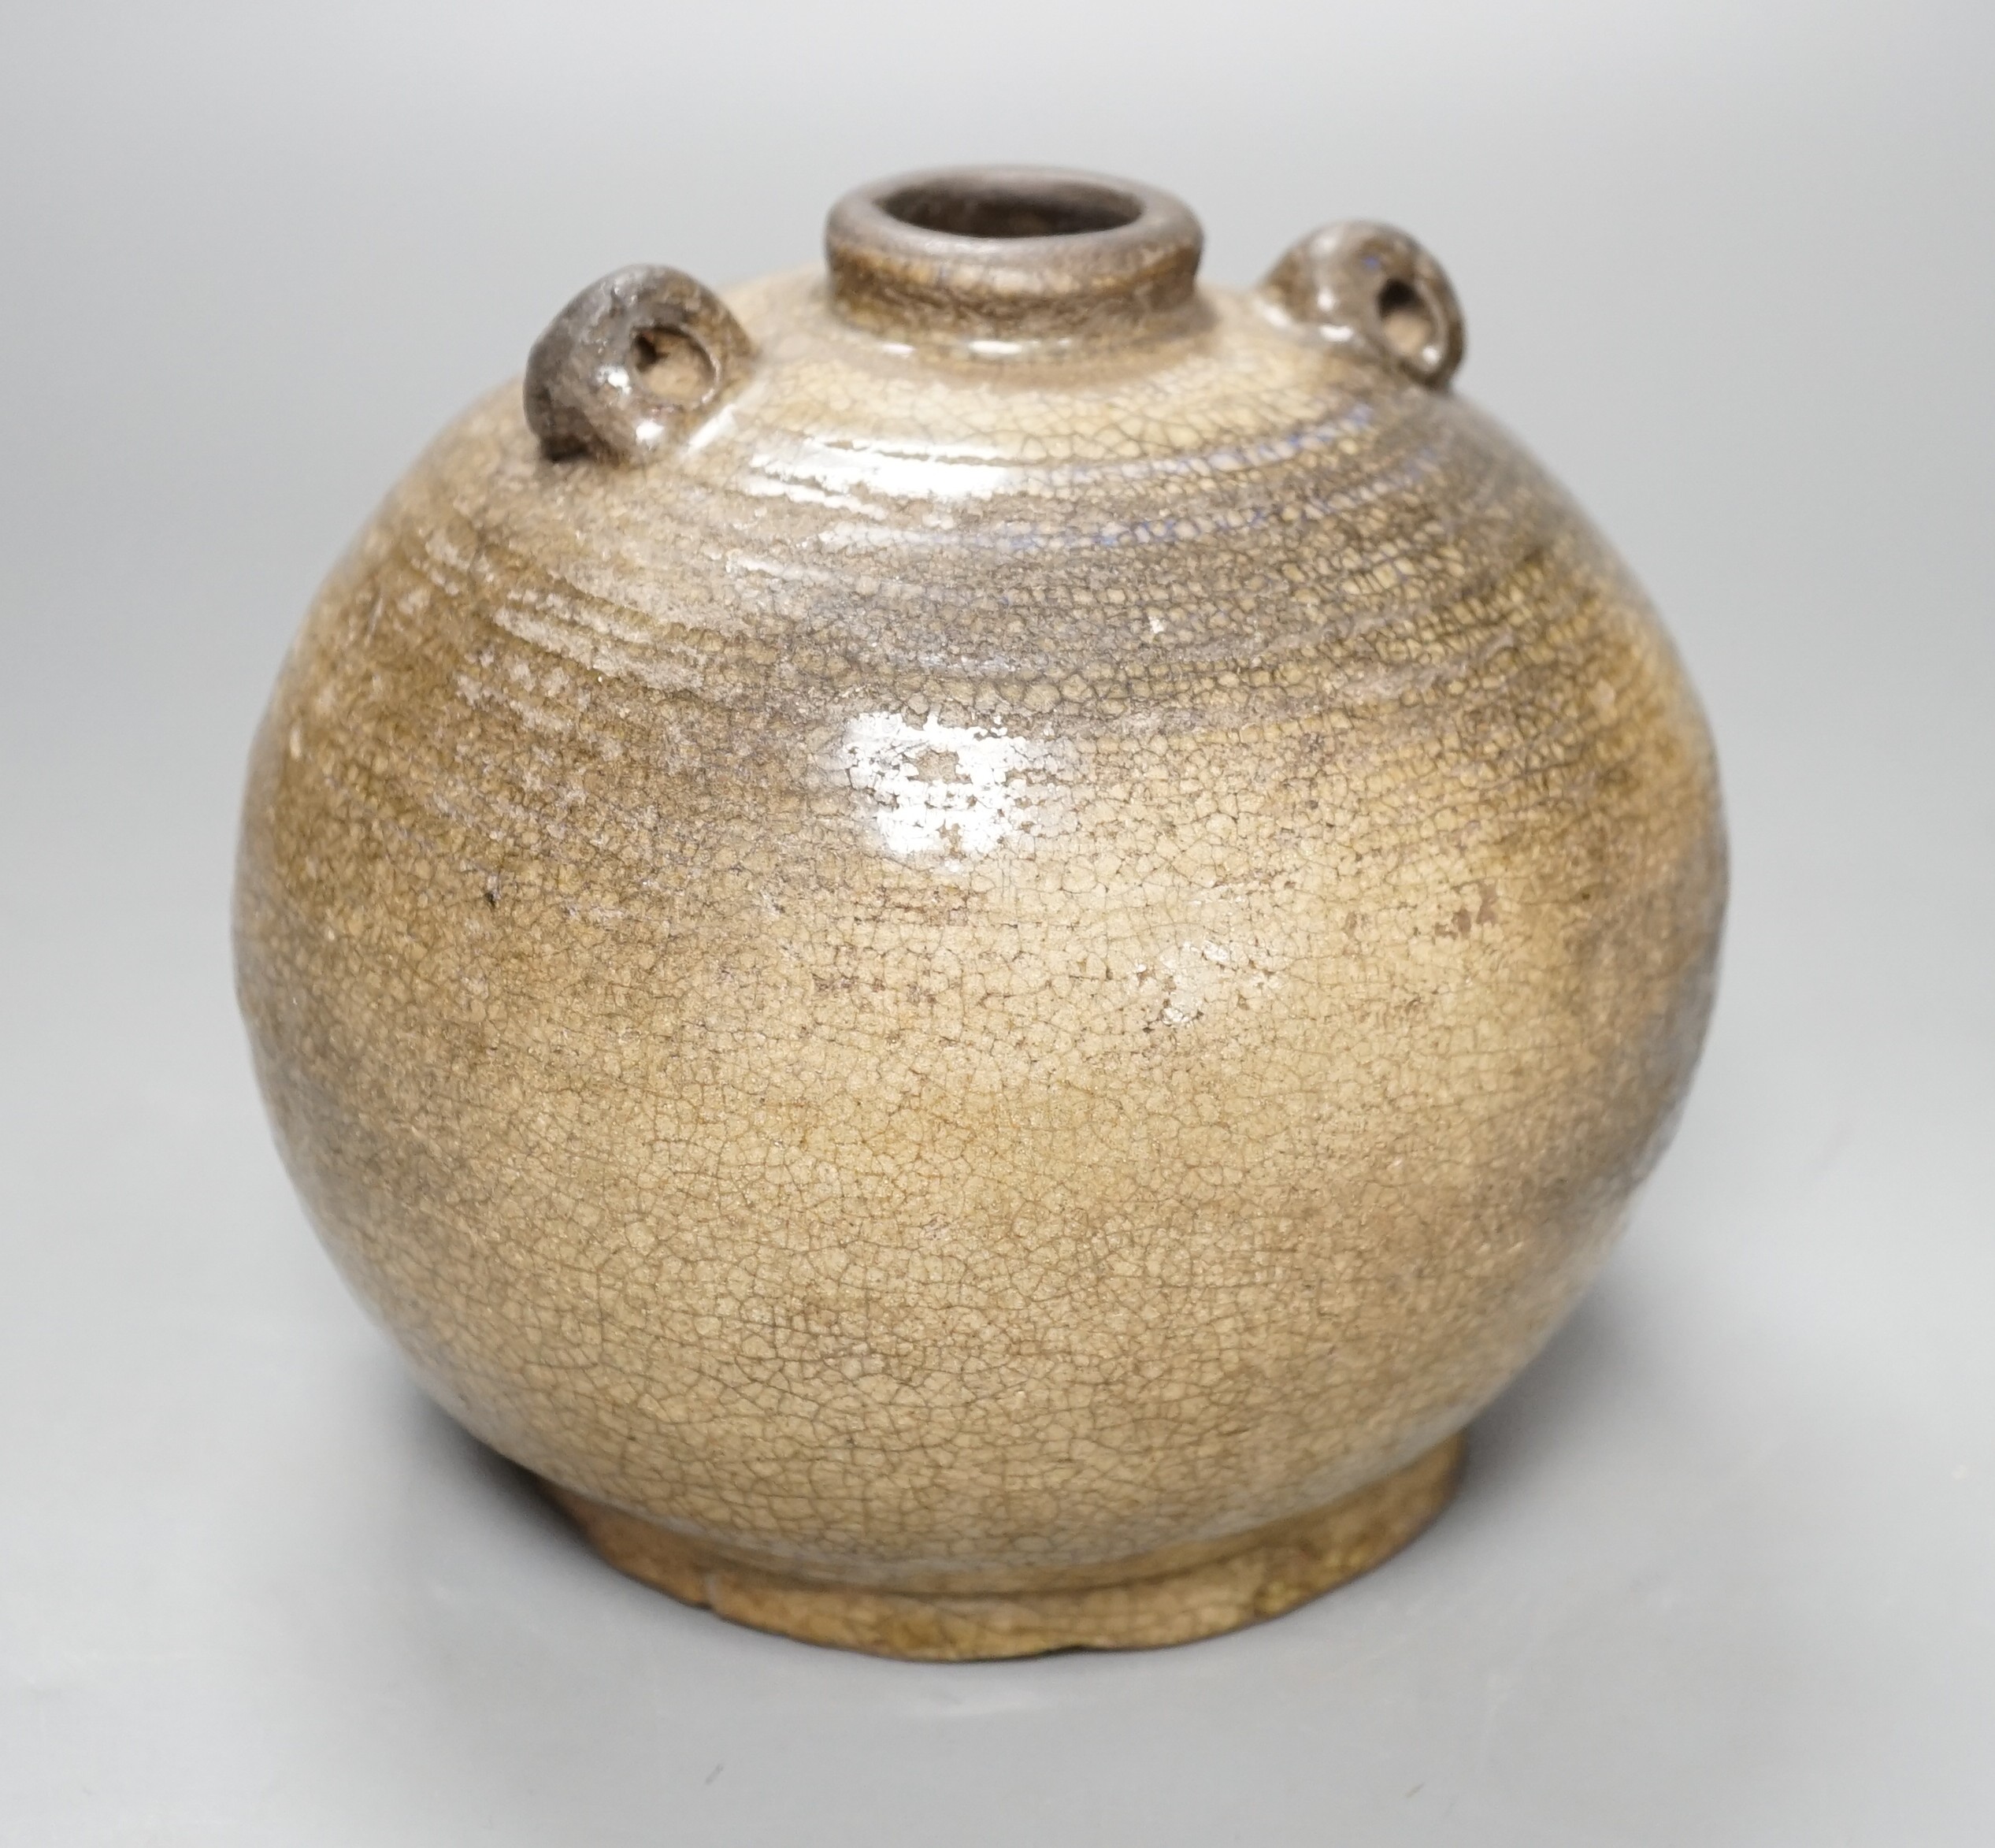 A South East Asian two-handled stoneware jar, possibly Annamese, 15th/16th century, 14cm